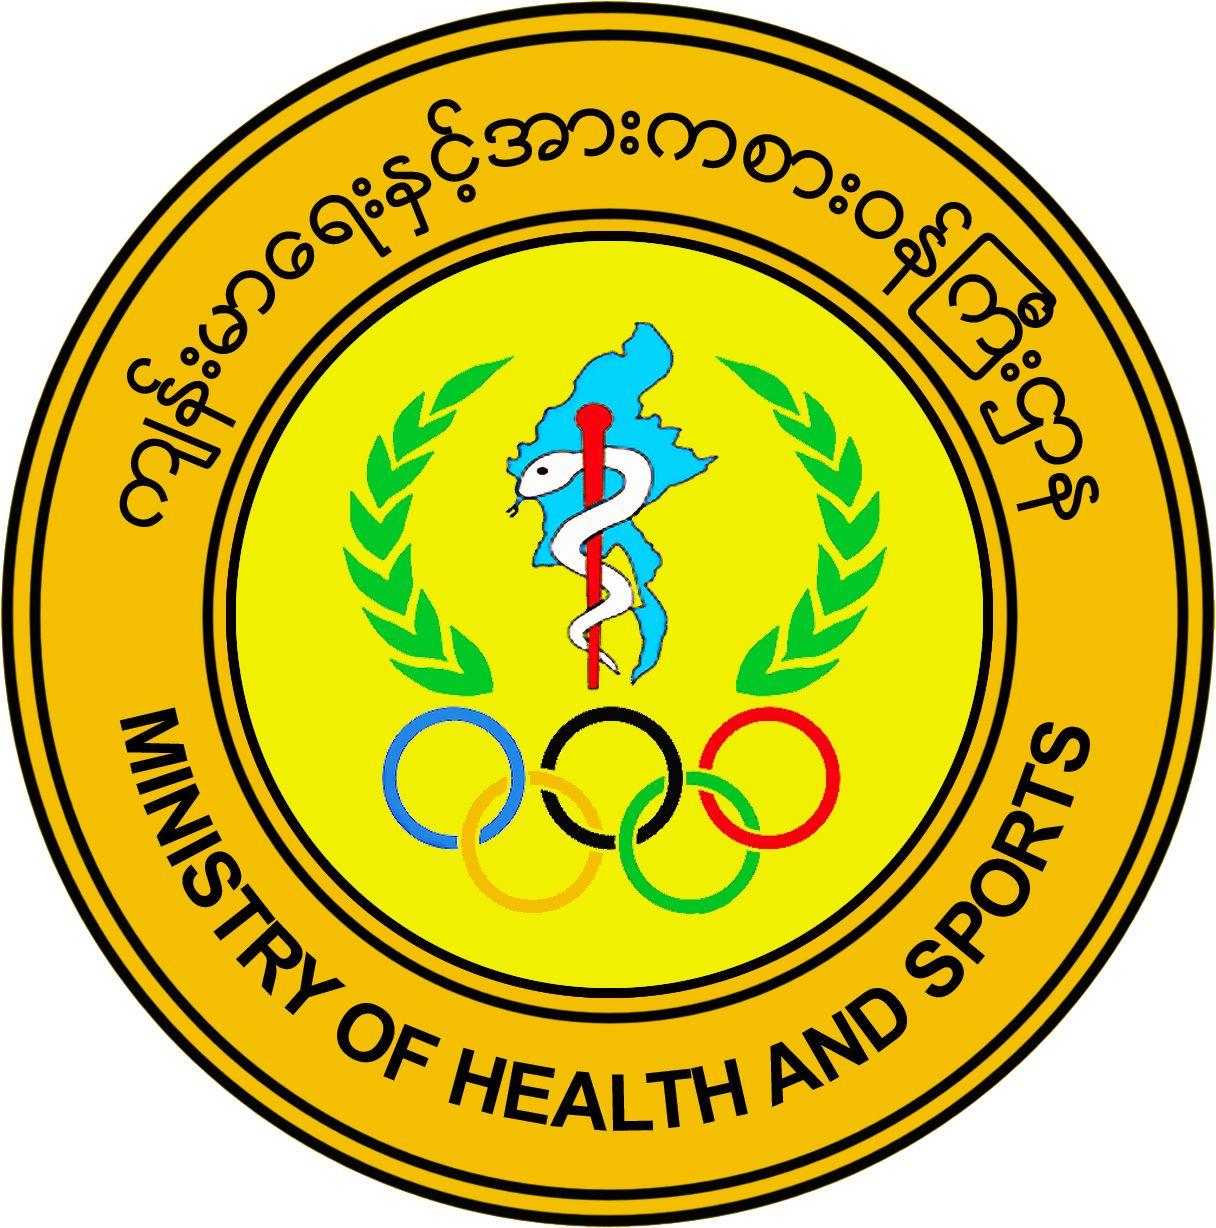 Ministry Logo - File:New logo of Ministry of Health and Sports, Myanmar.jpg